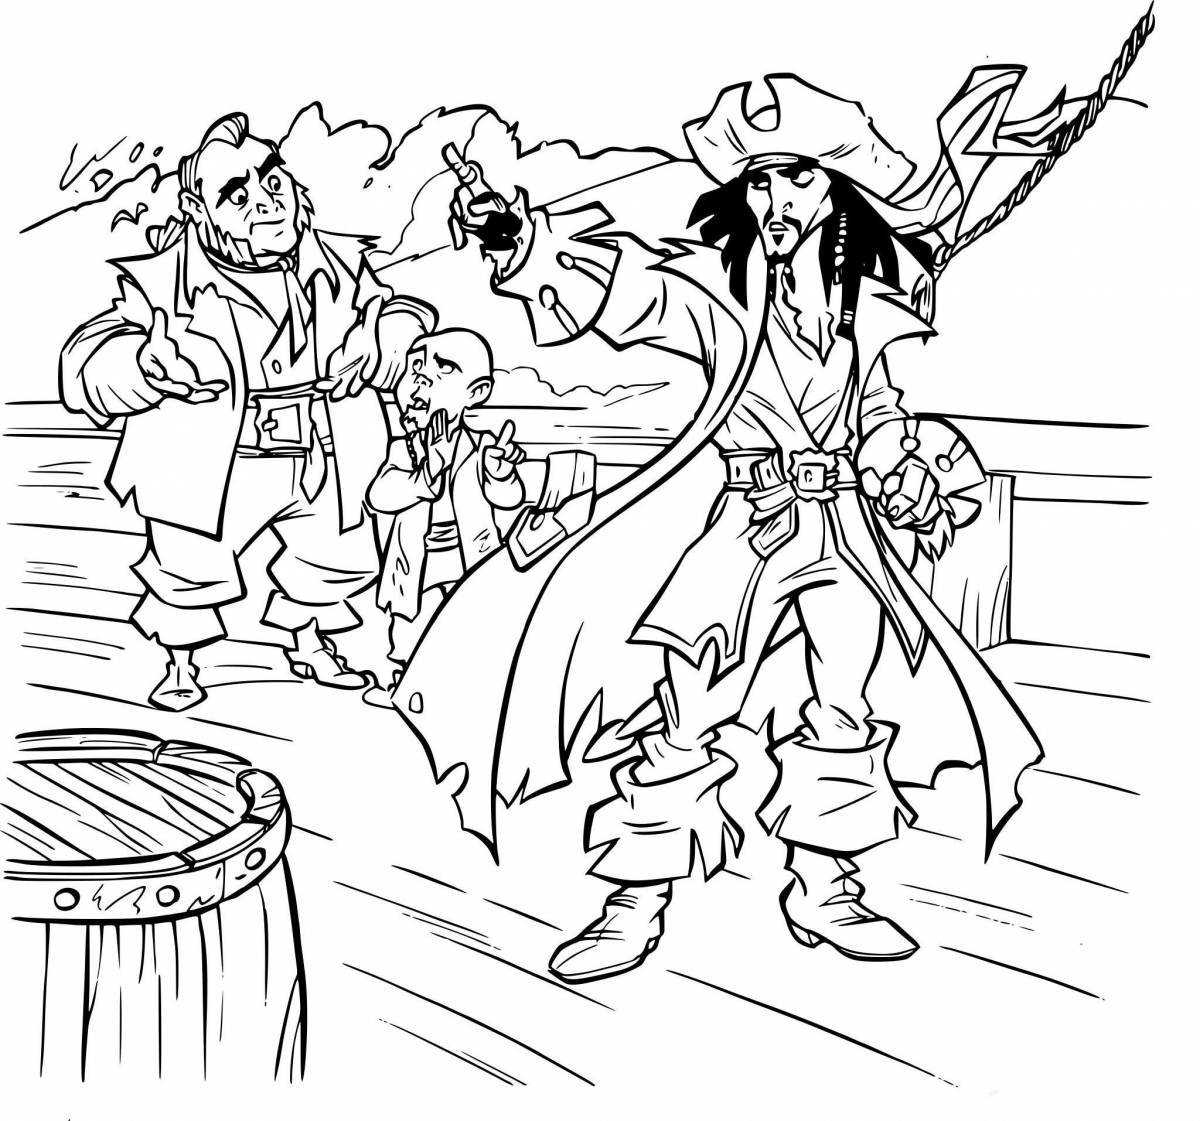 Colorful Jack Sparrow coloring book